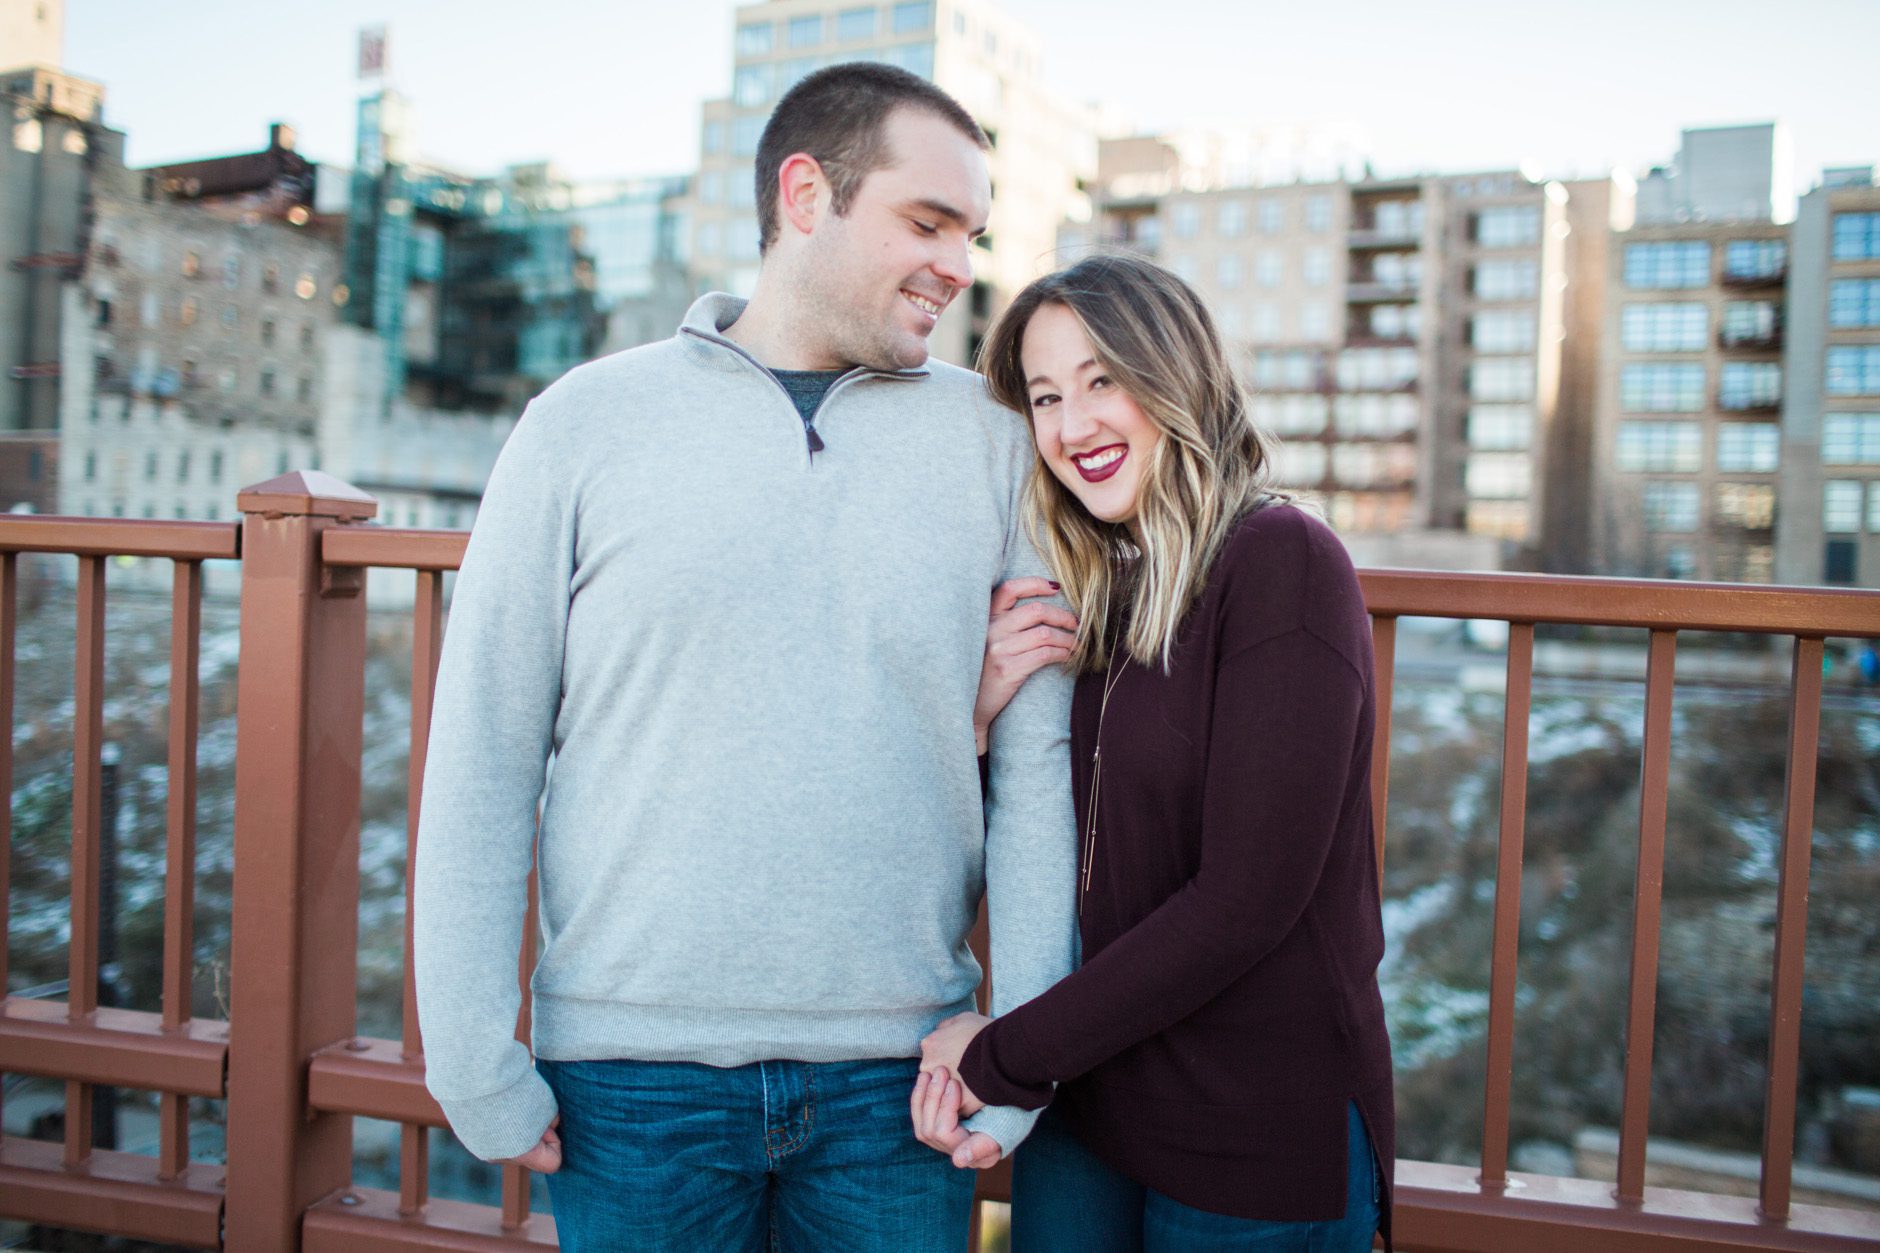 engagement-photography-minneapolis-stonearch-eileenkphoto-097